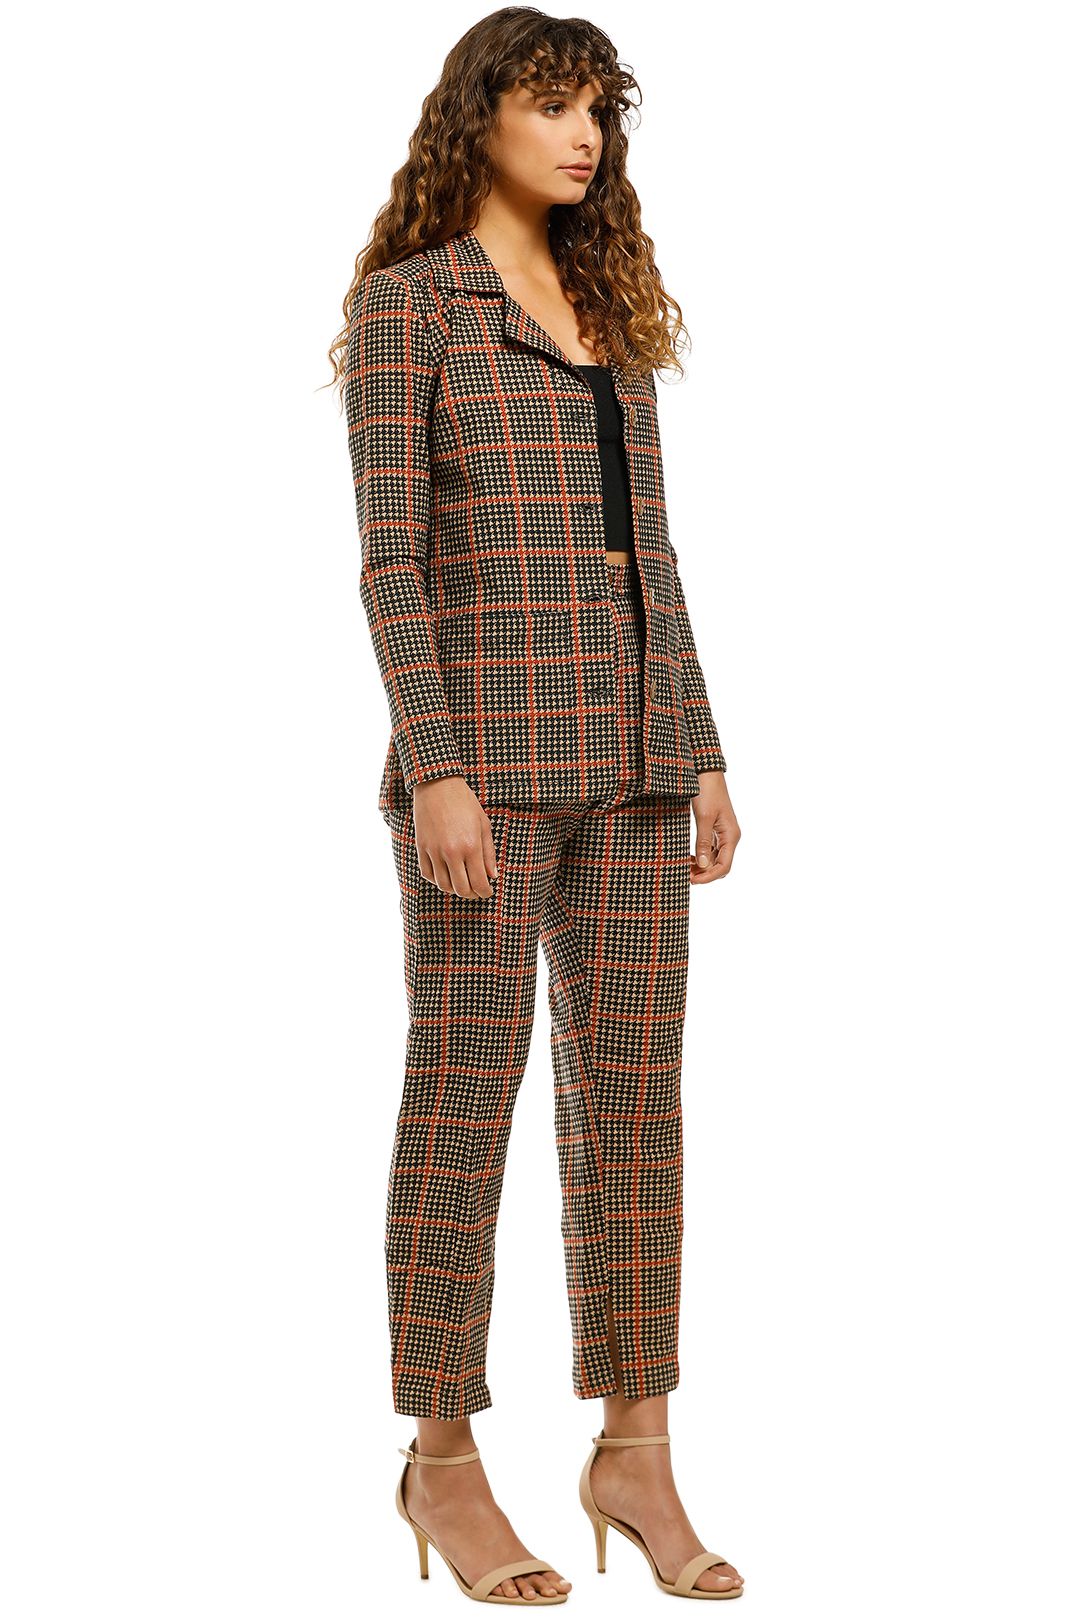 Rue-Stiic-Tennesse-Blazer-and-Pant-Set-Houndstooth-Side